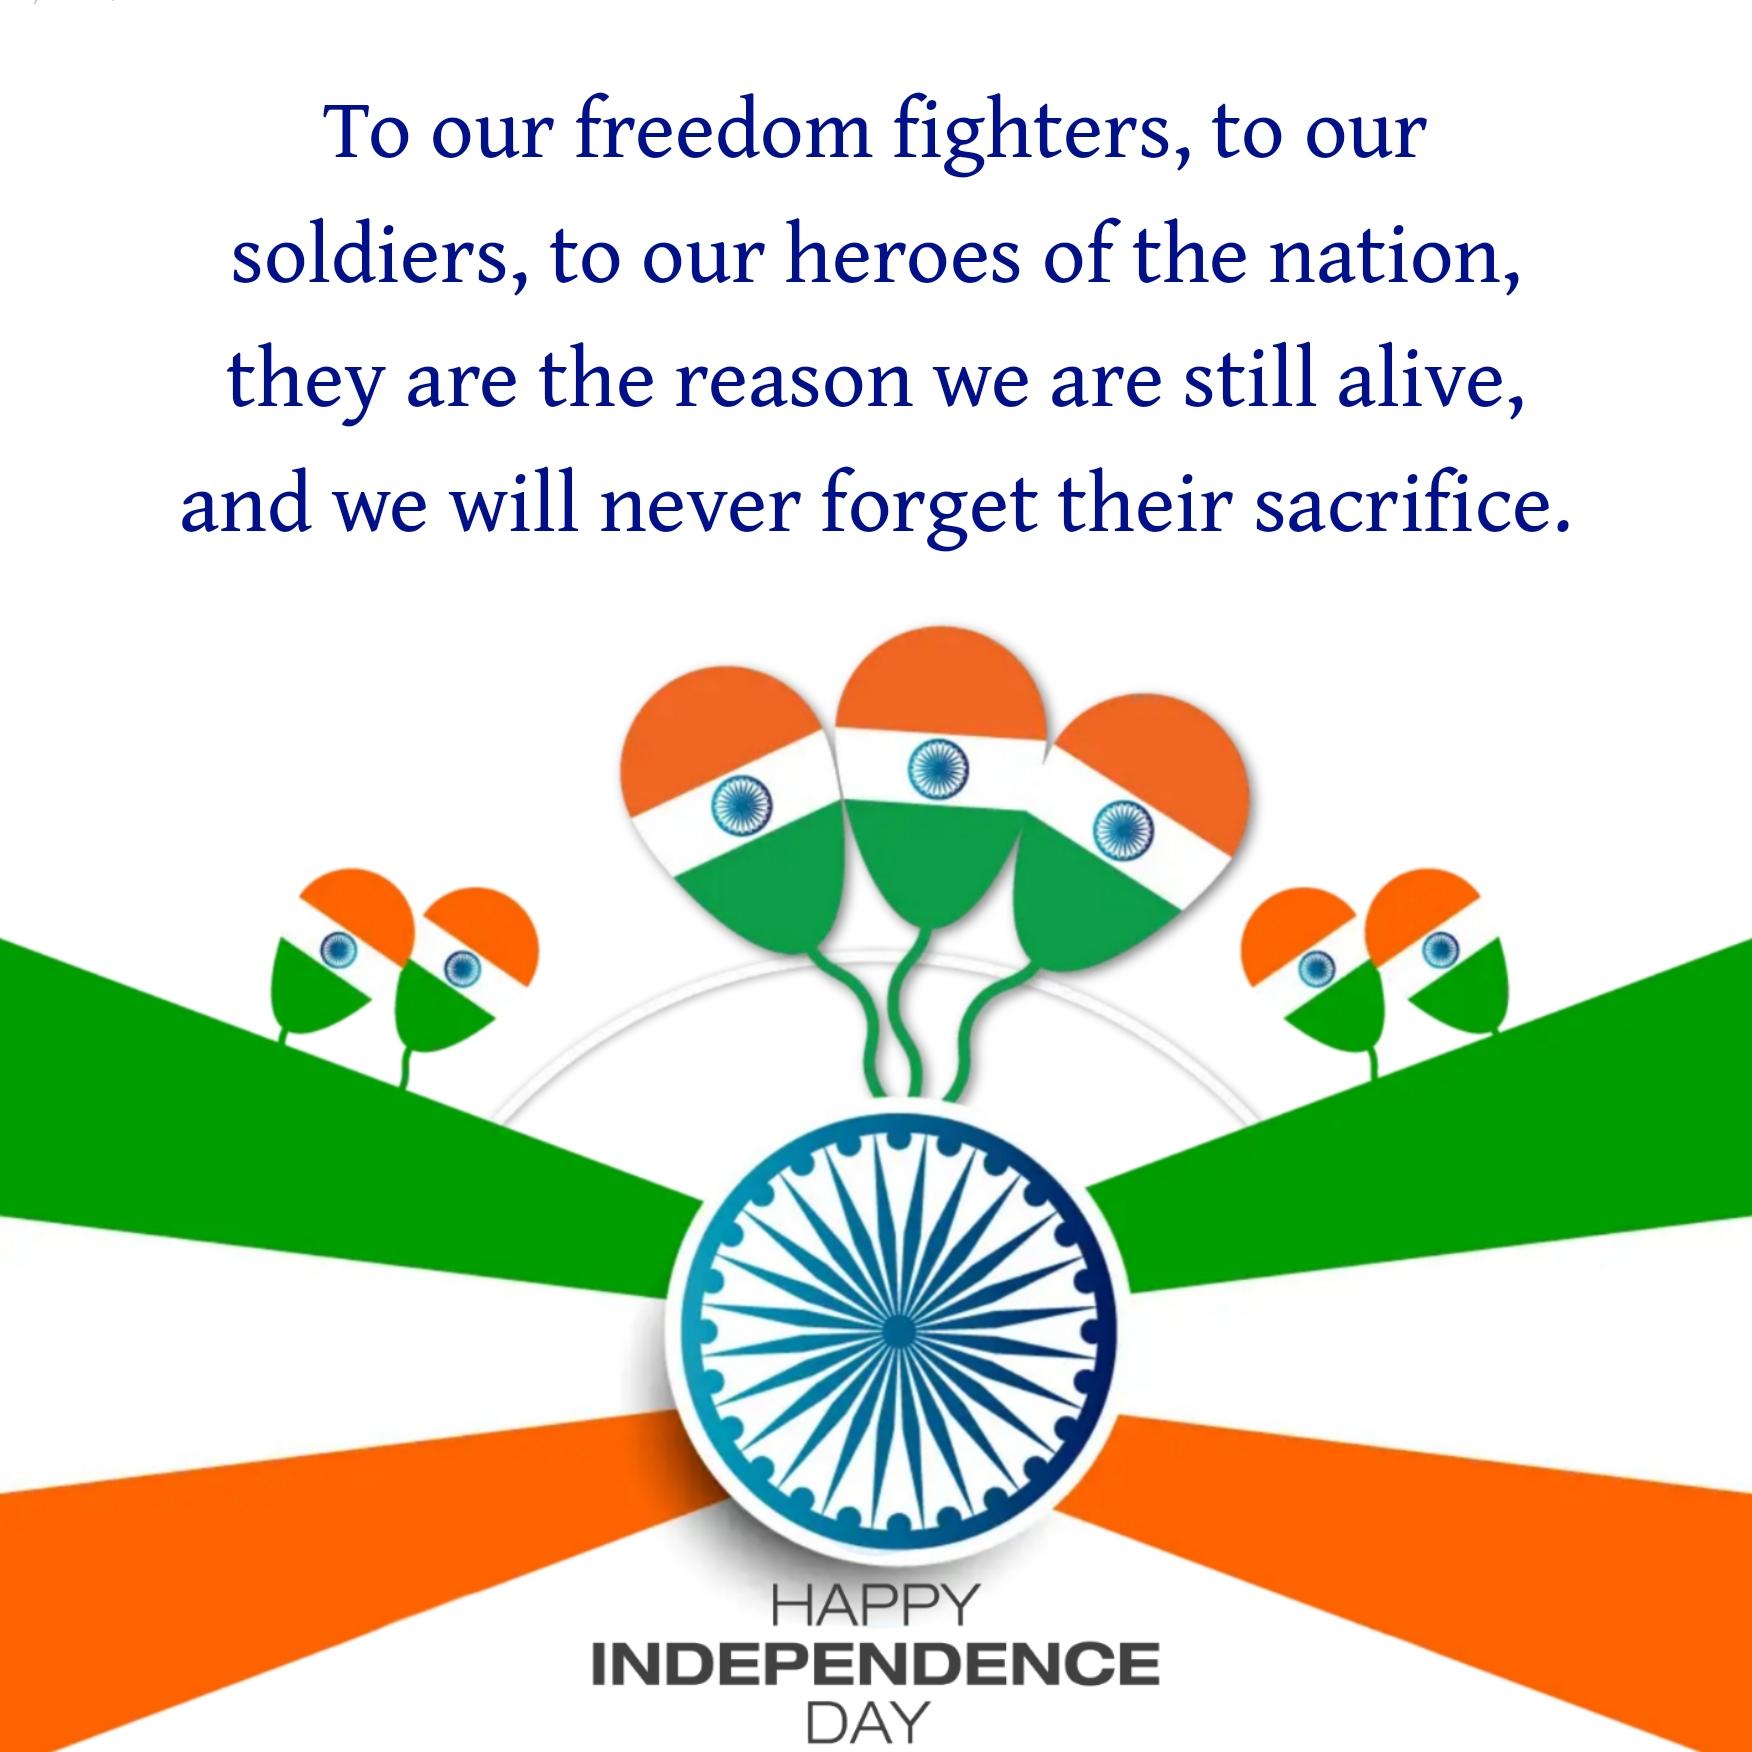 To our freedom fighters to our soldiers to our heroes of the nation